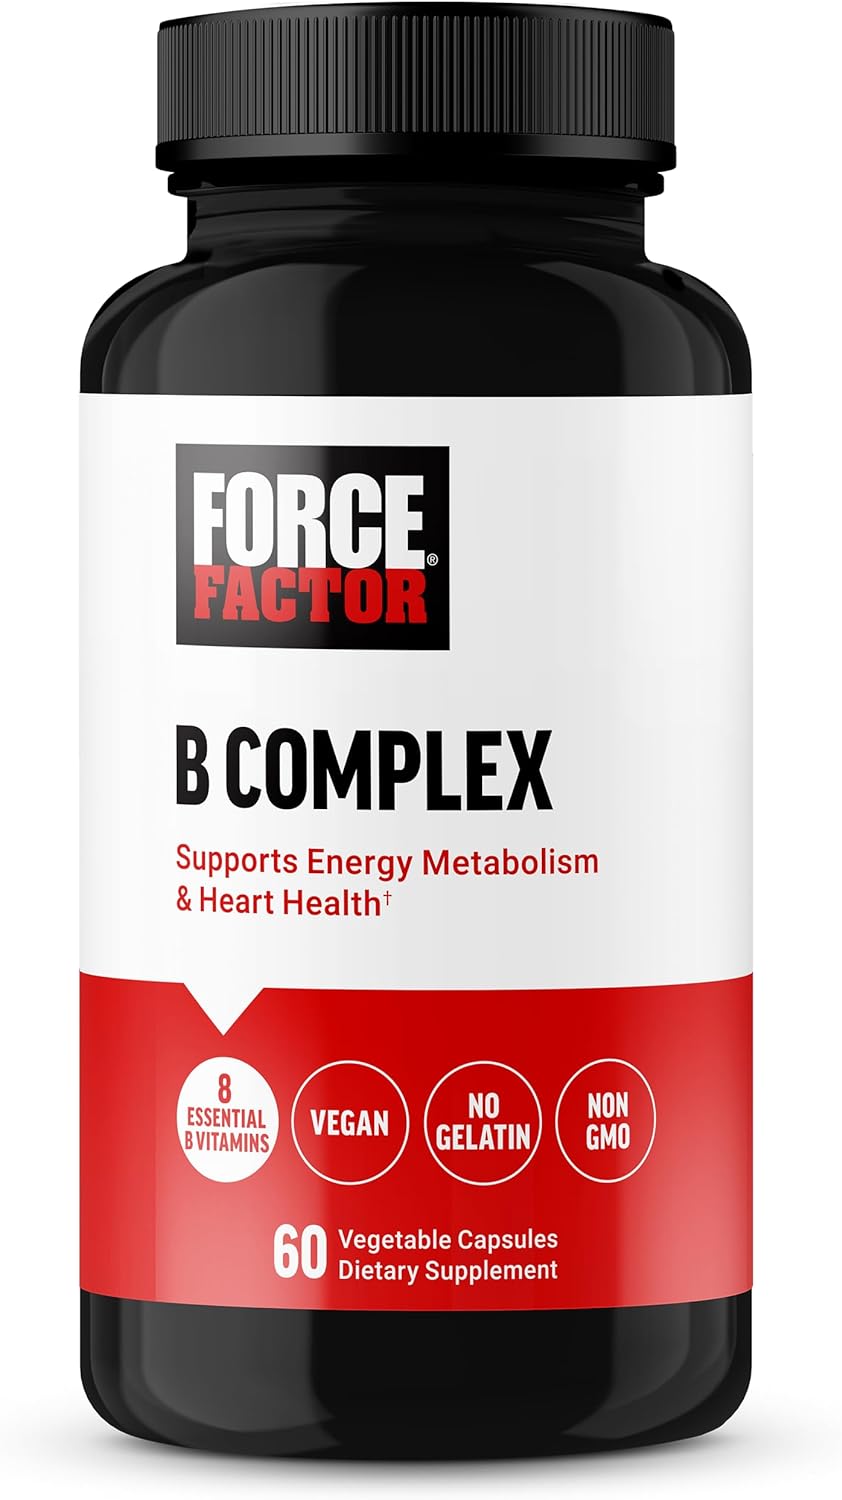 FORCE FACTOR Vitamin B Complex to Support Energy, Vitality, and Heart Health, Includes Vitamin B1, Vitamin B2, Vitamin B3, Vitamin B6, Vitamin B12, and More, Vegan, Non-GMO, 60 Vegetable Capsules